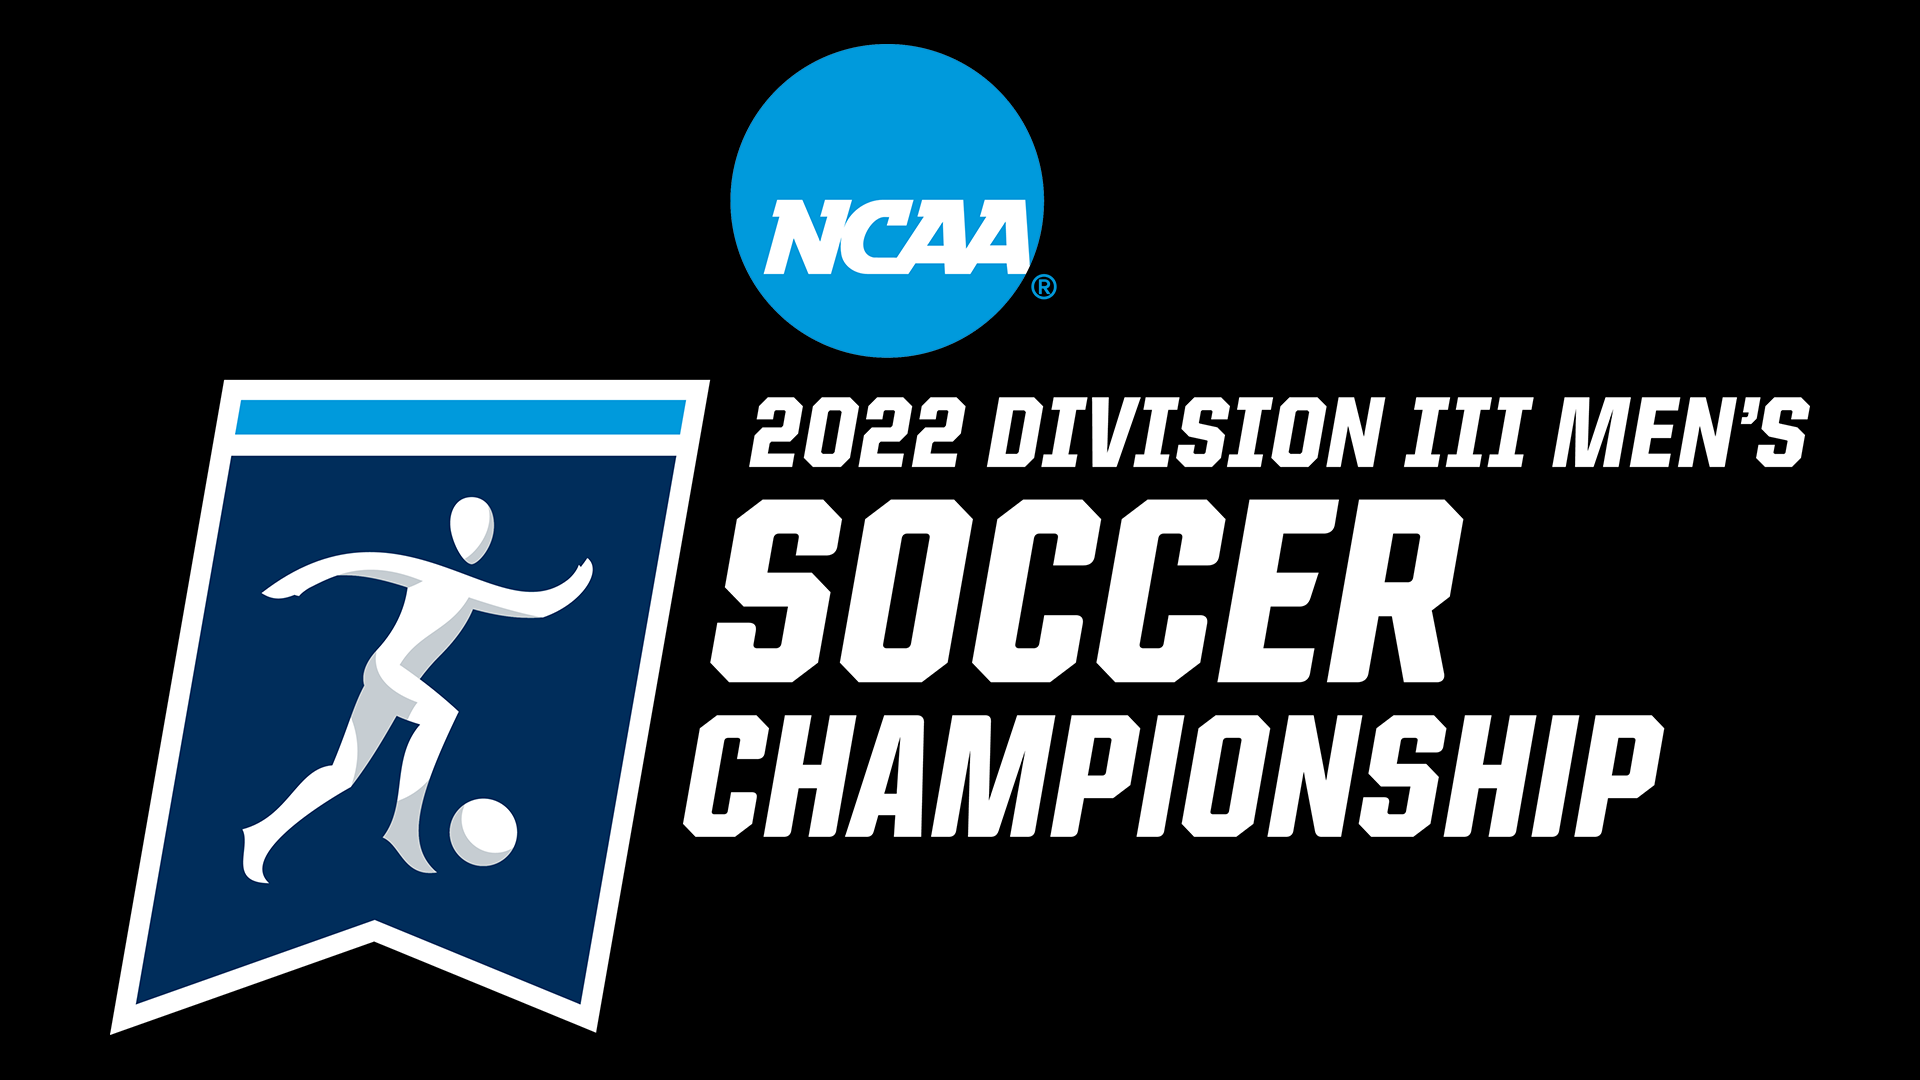 Lake Forest to Face St. Olaf in First Round of NCAA Tournament